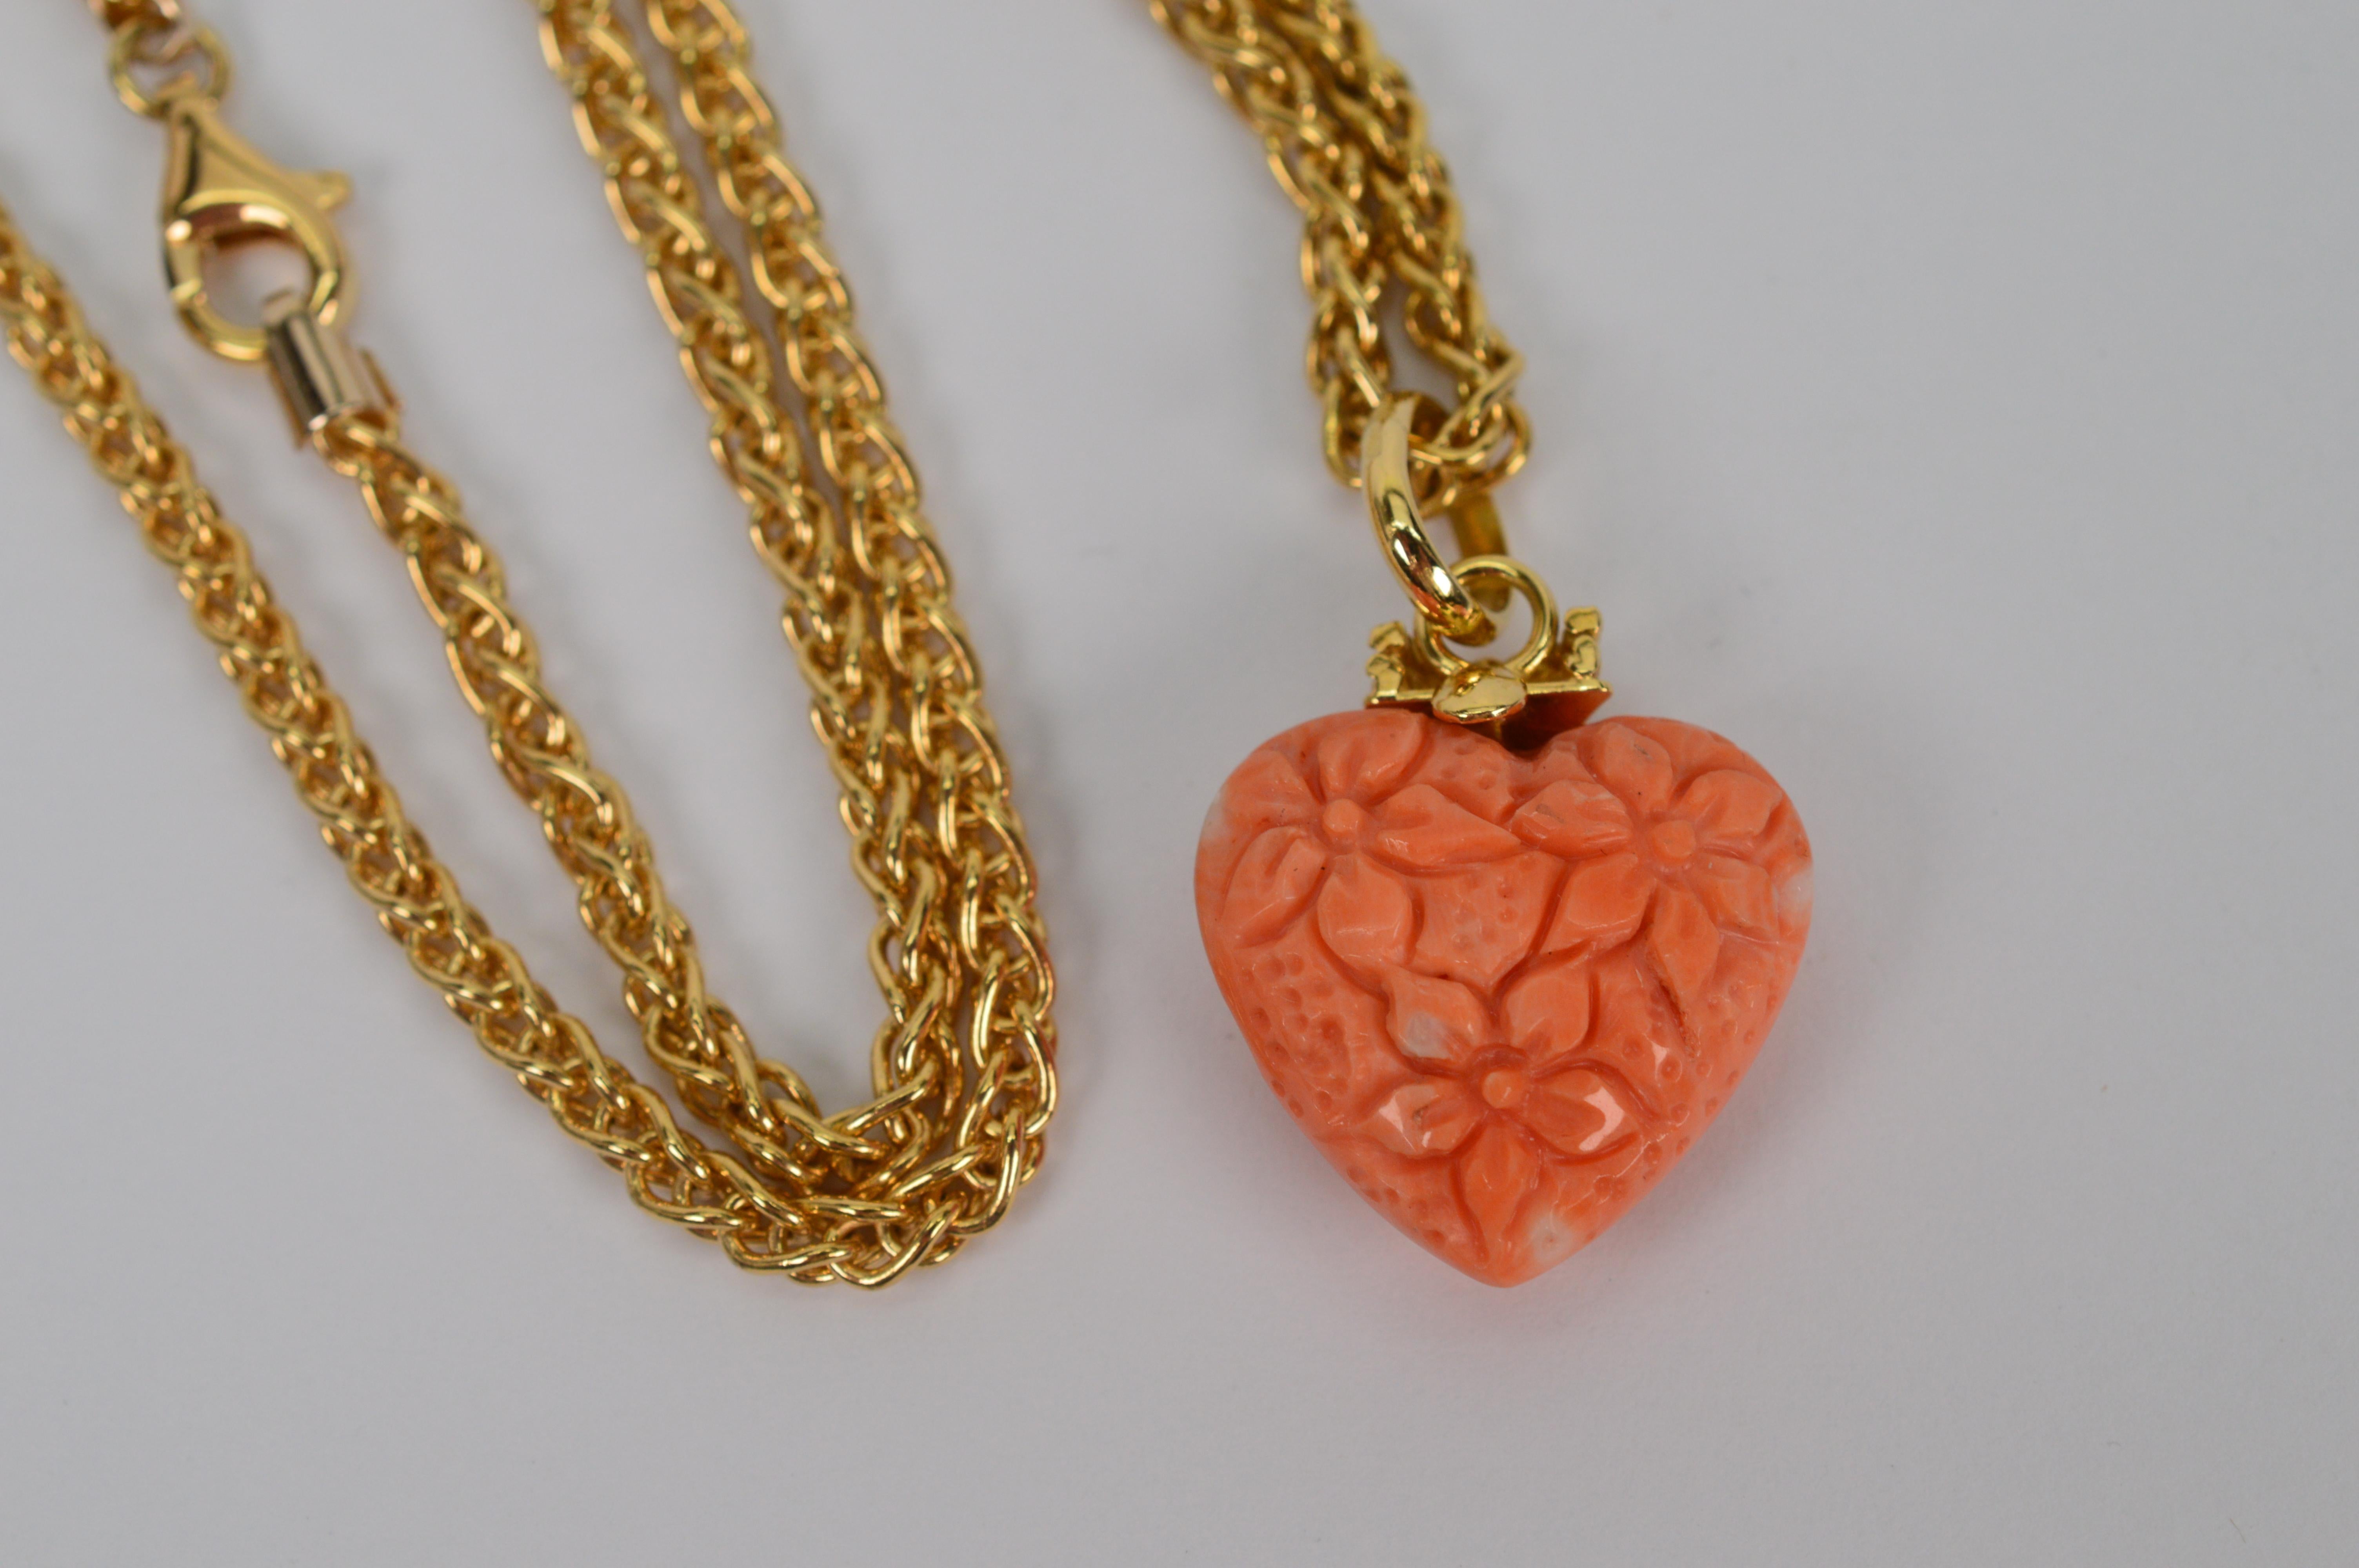 Hand Carved Cherub Coral Heart Pendant 18 Karat Italian Gold Chain Necklace For Sale 2